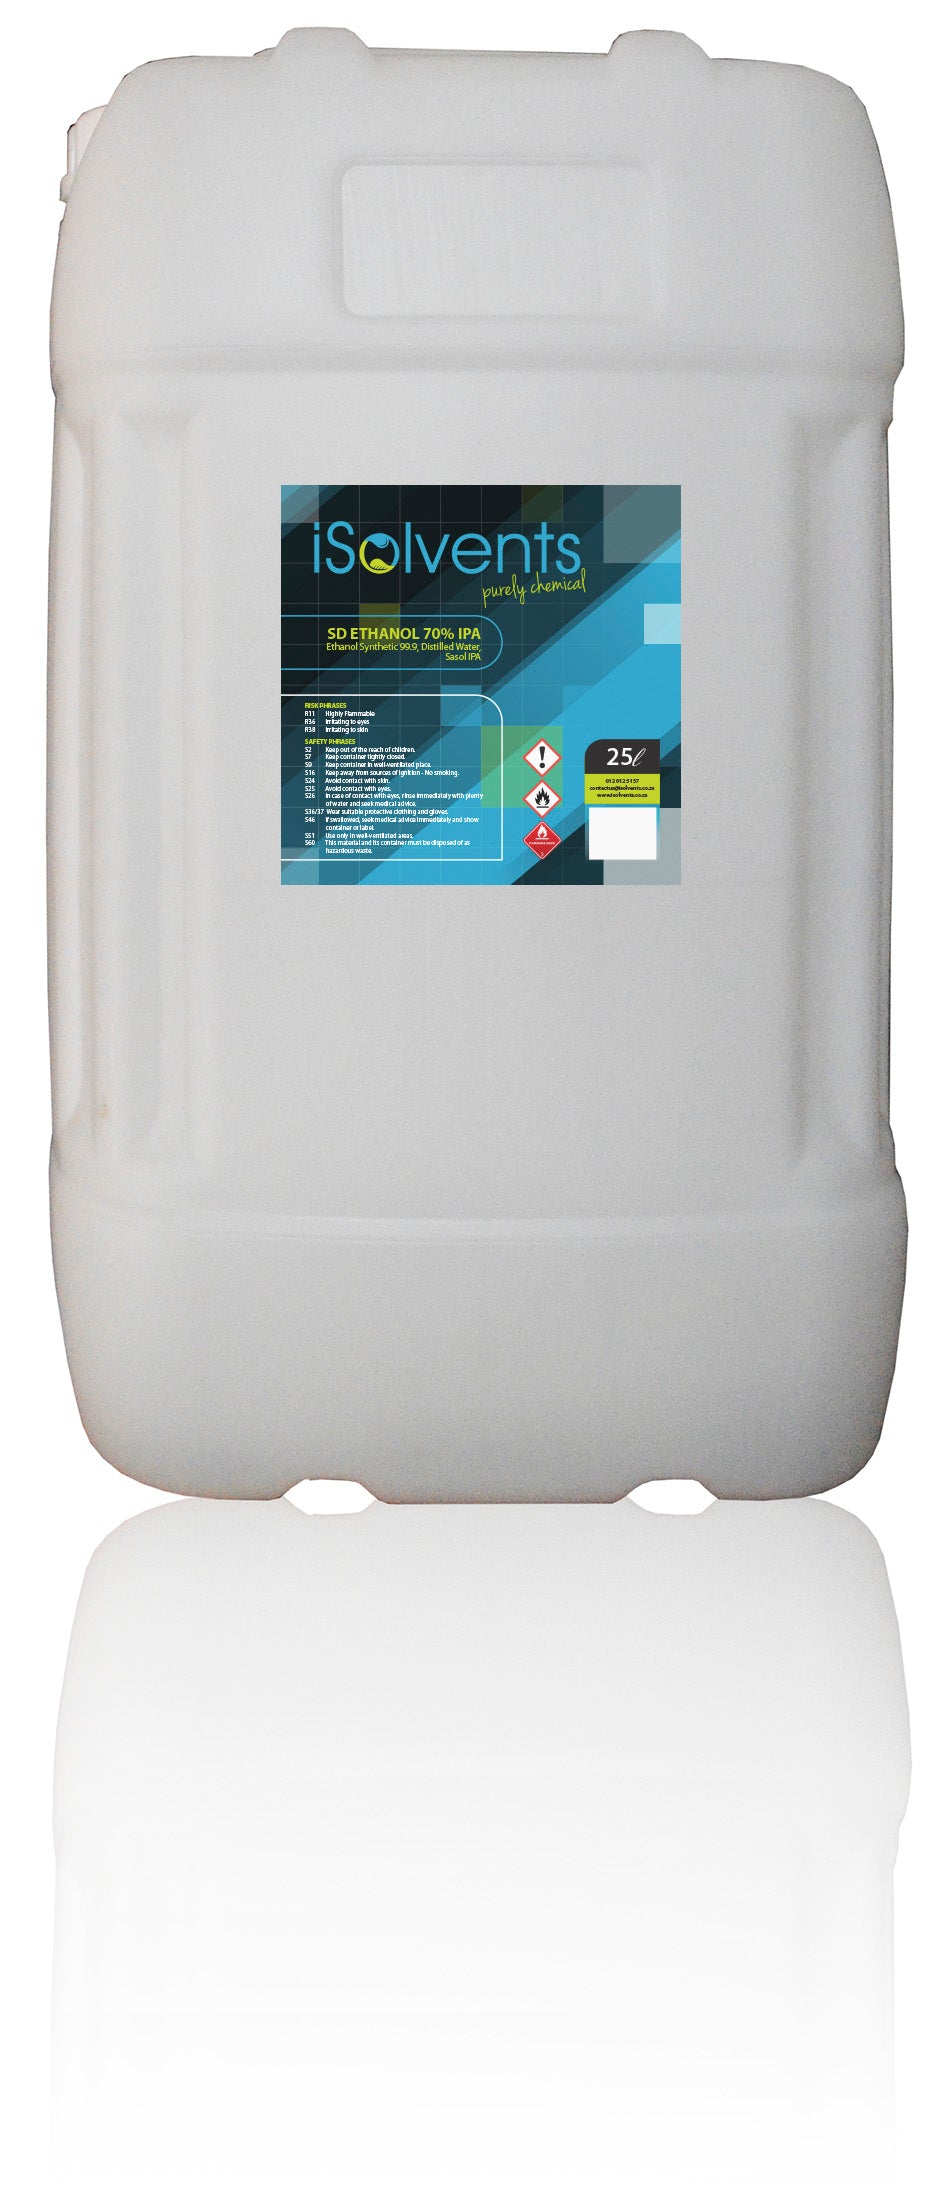 Synthetic denatured ethanol product 70 IPA 25L